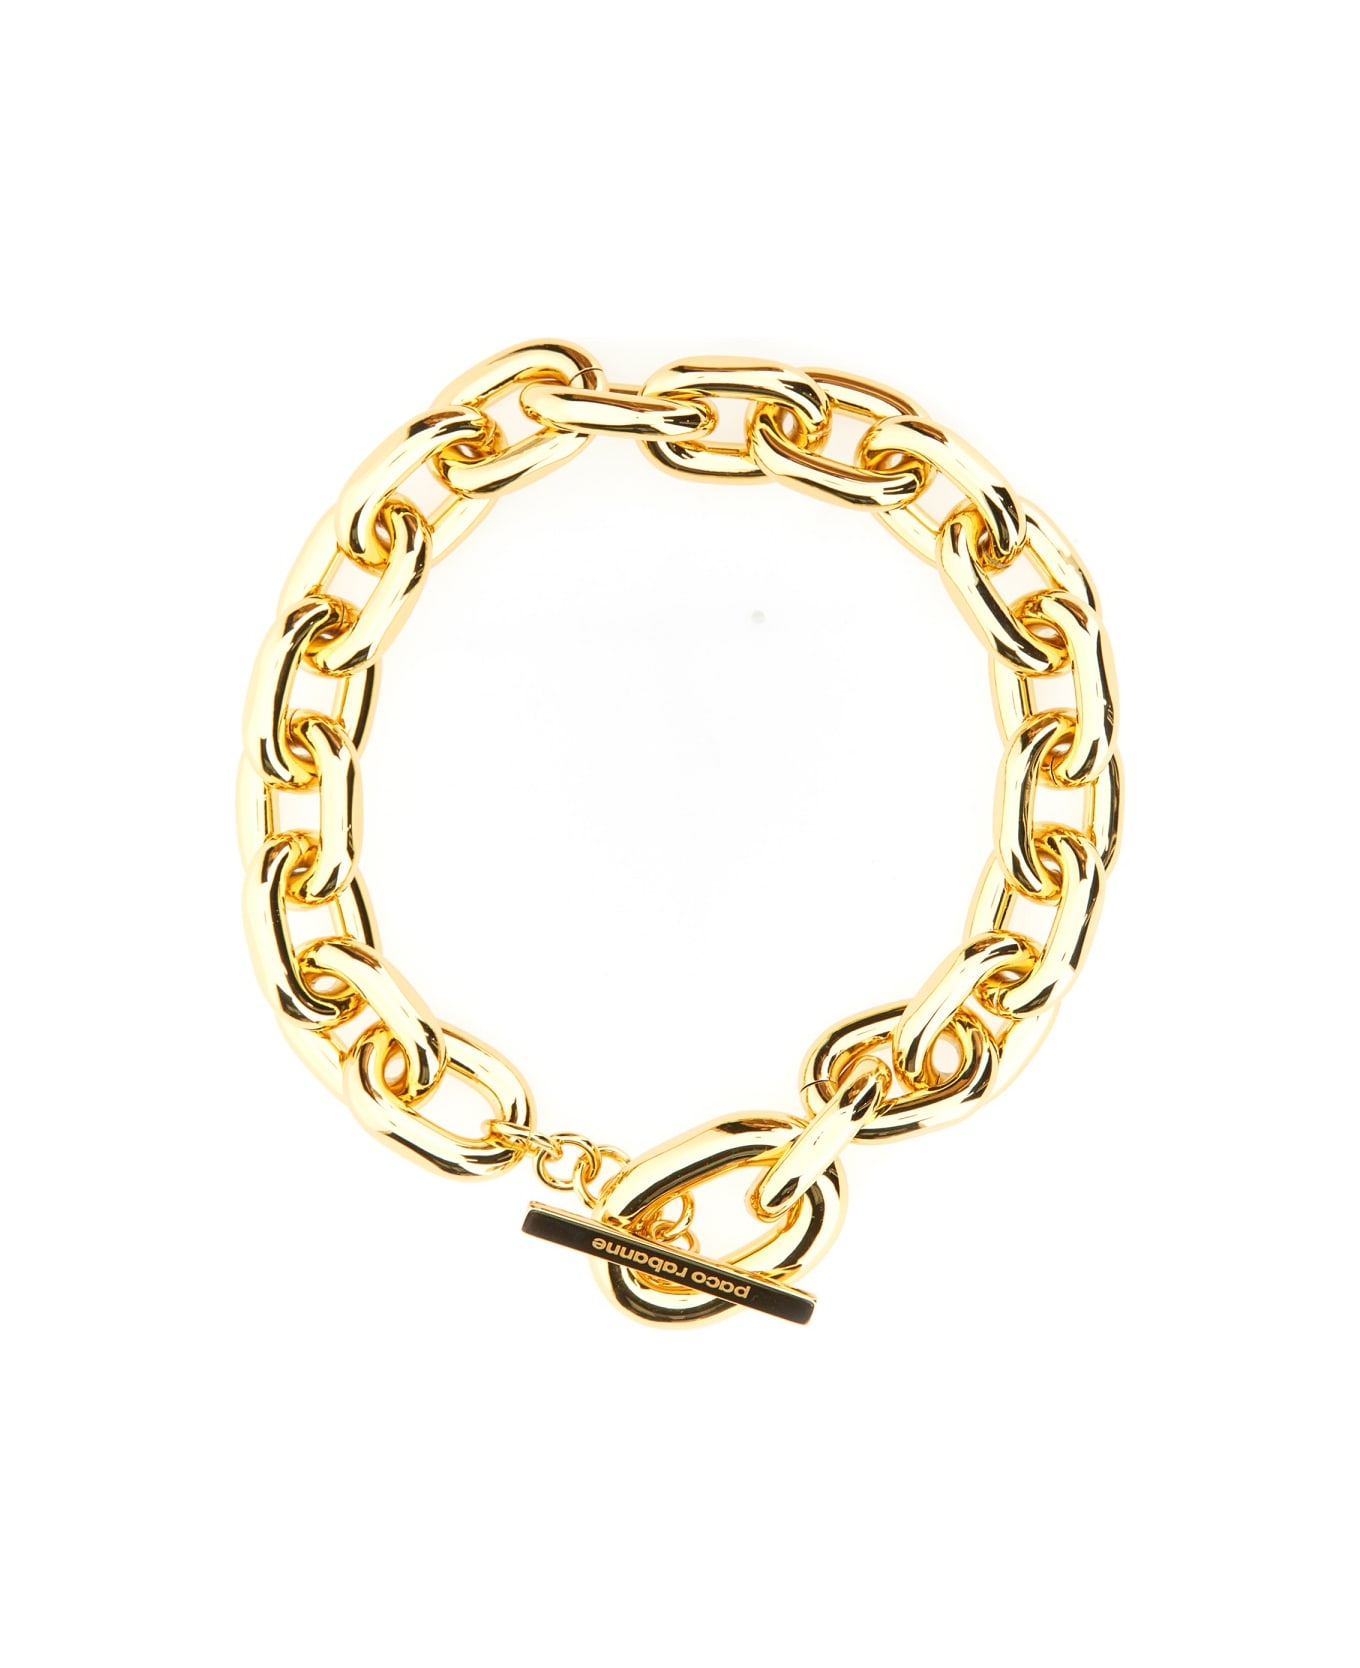 Paco Rabanne "xl Link" Necklace - GOLD